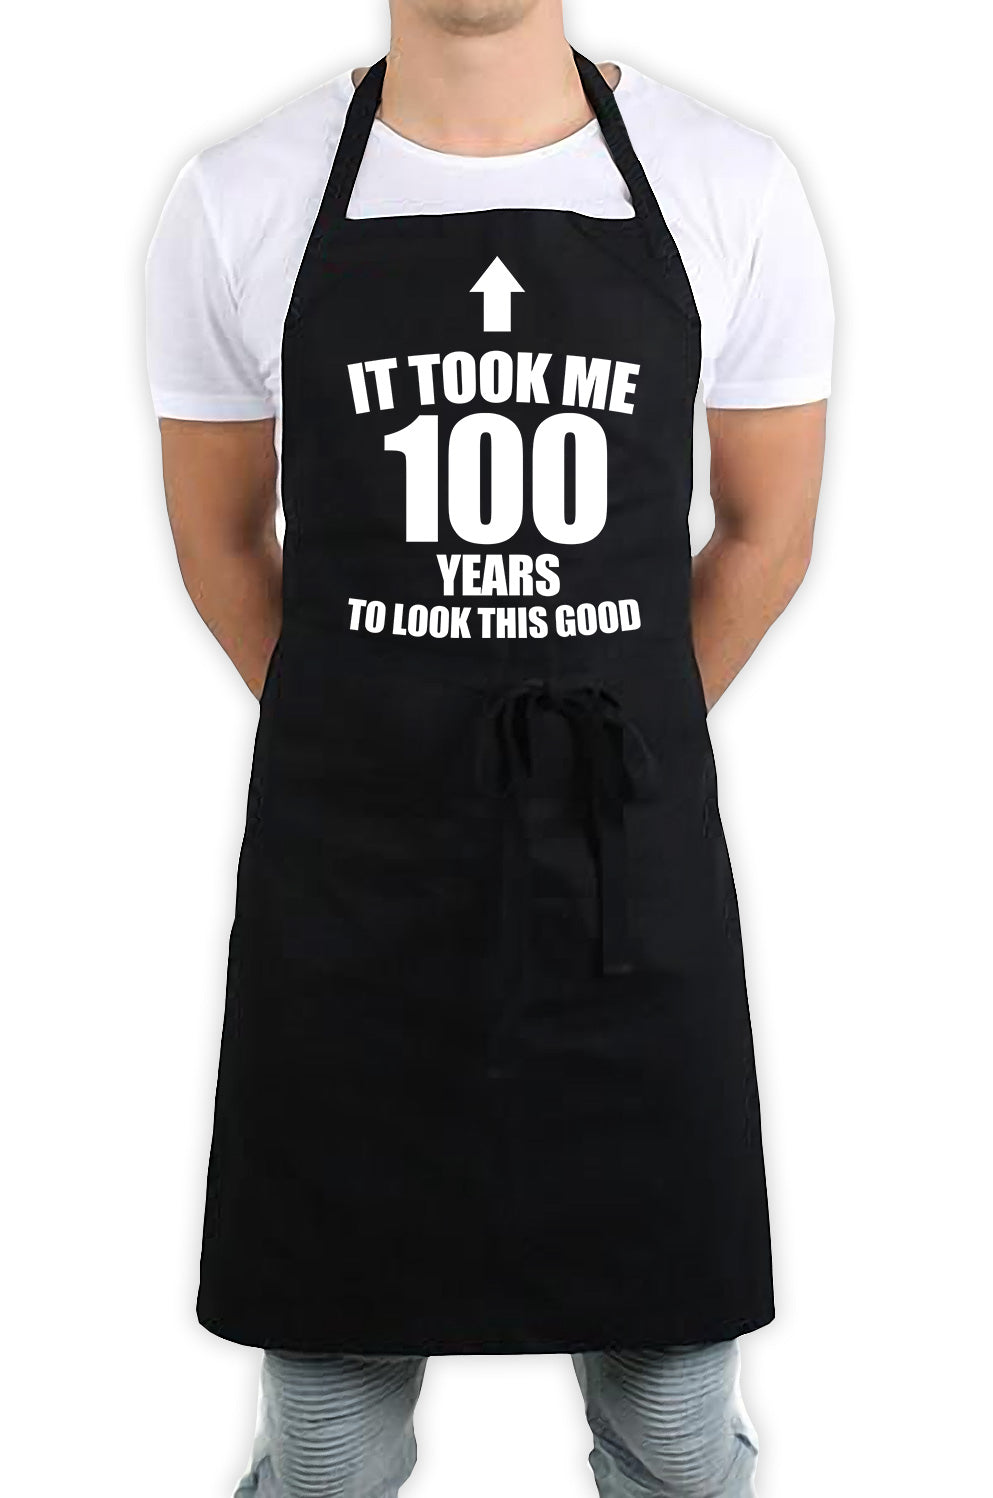 It Took Me 100 Years To Look This Good Funny Kitchen BBQ Apron Black